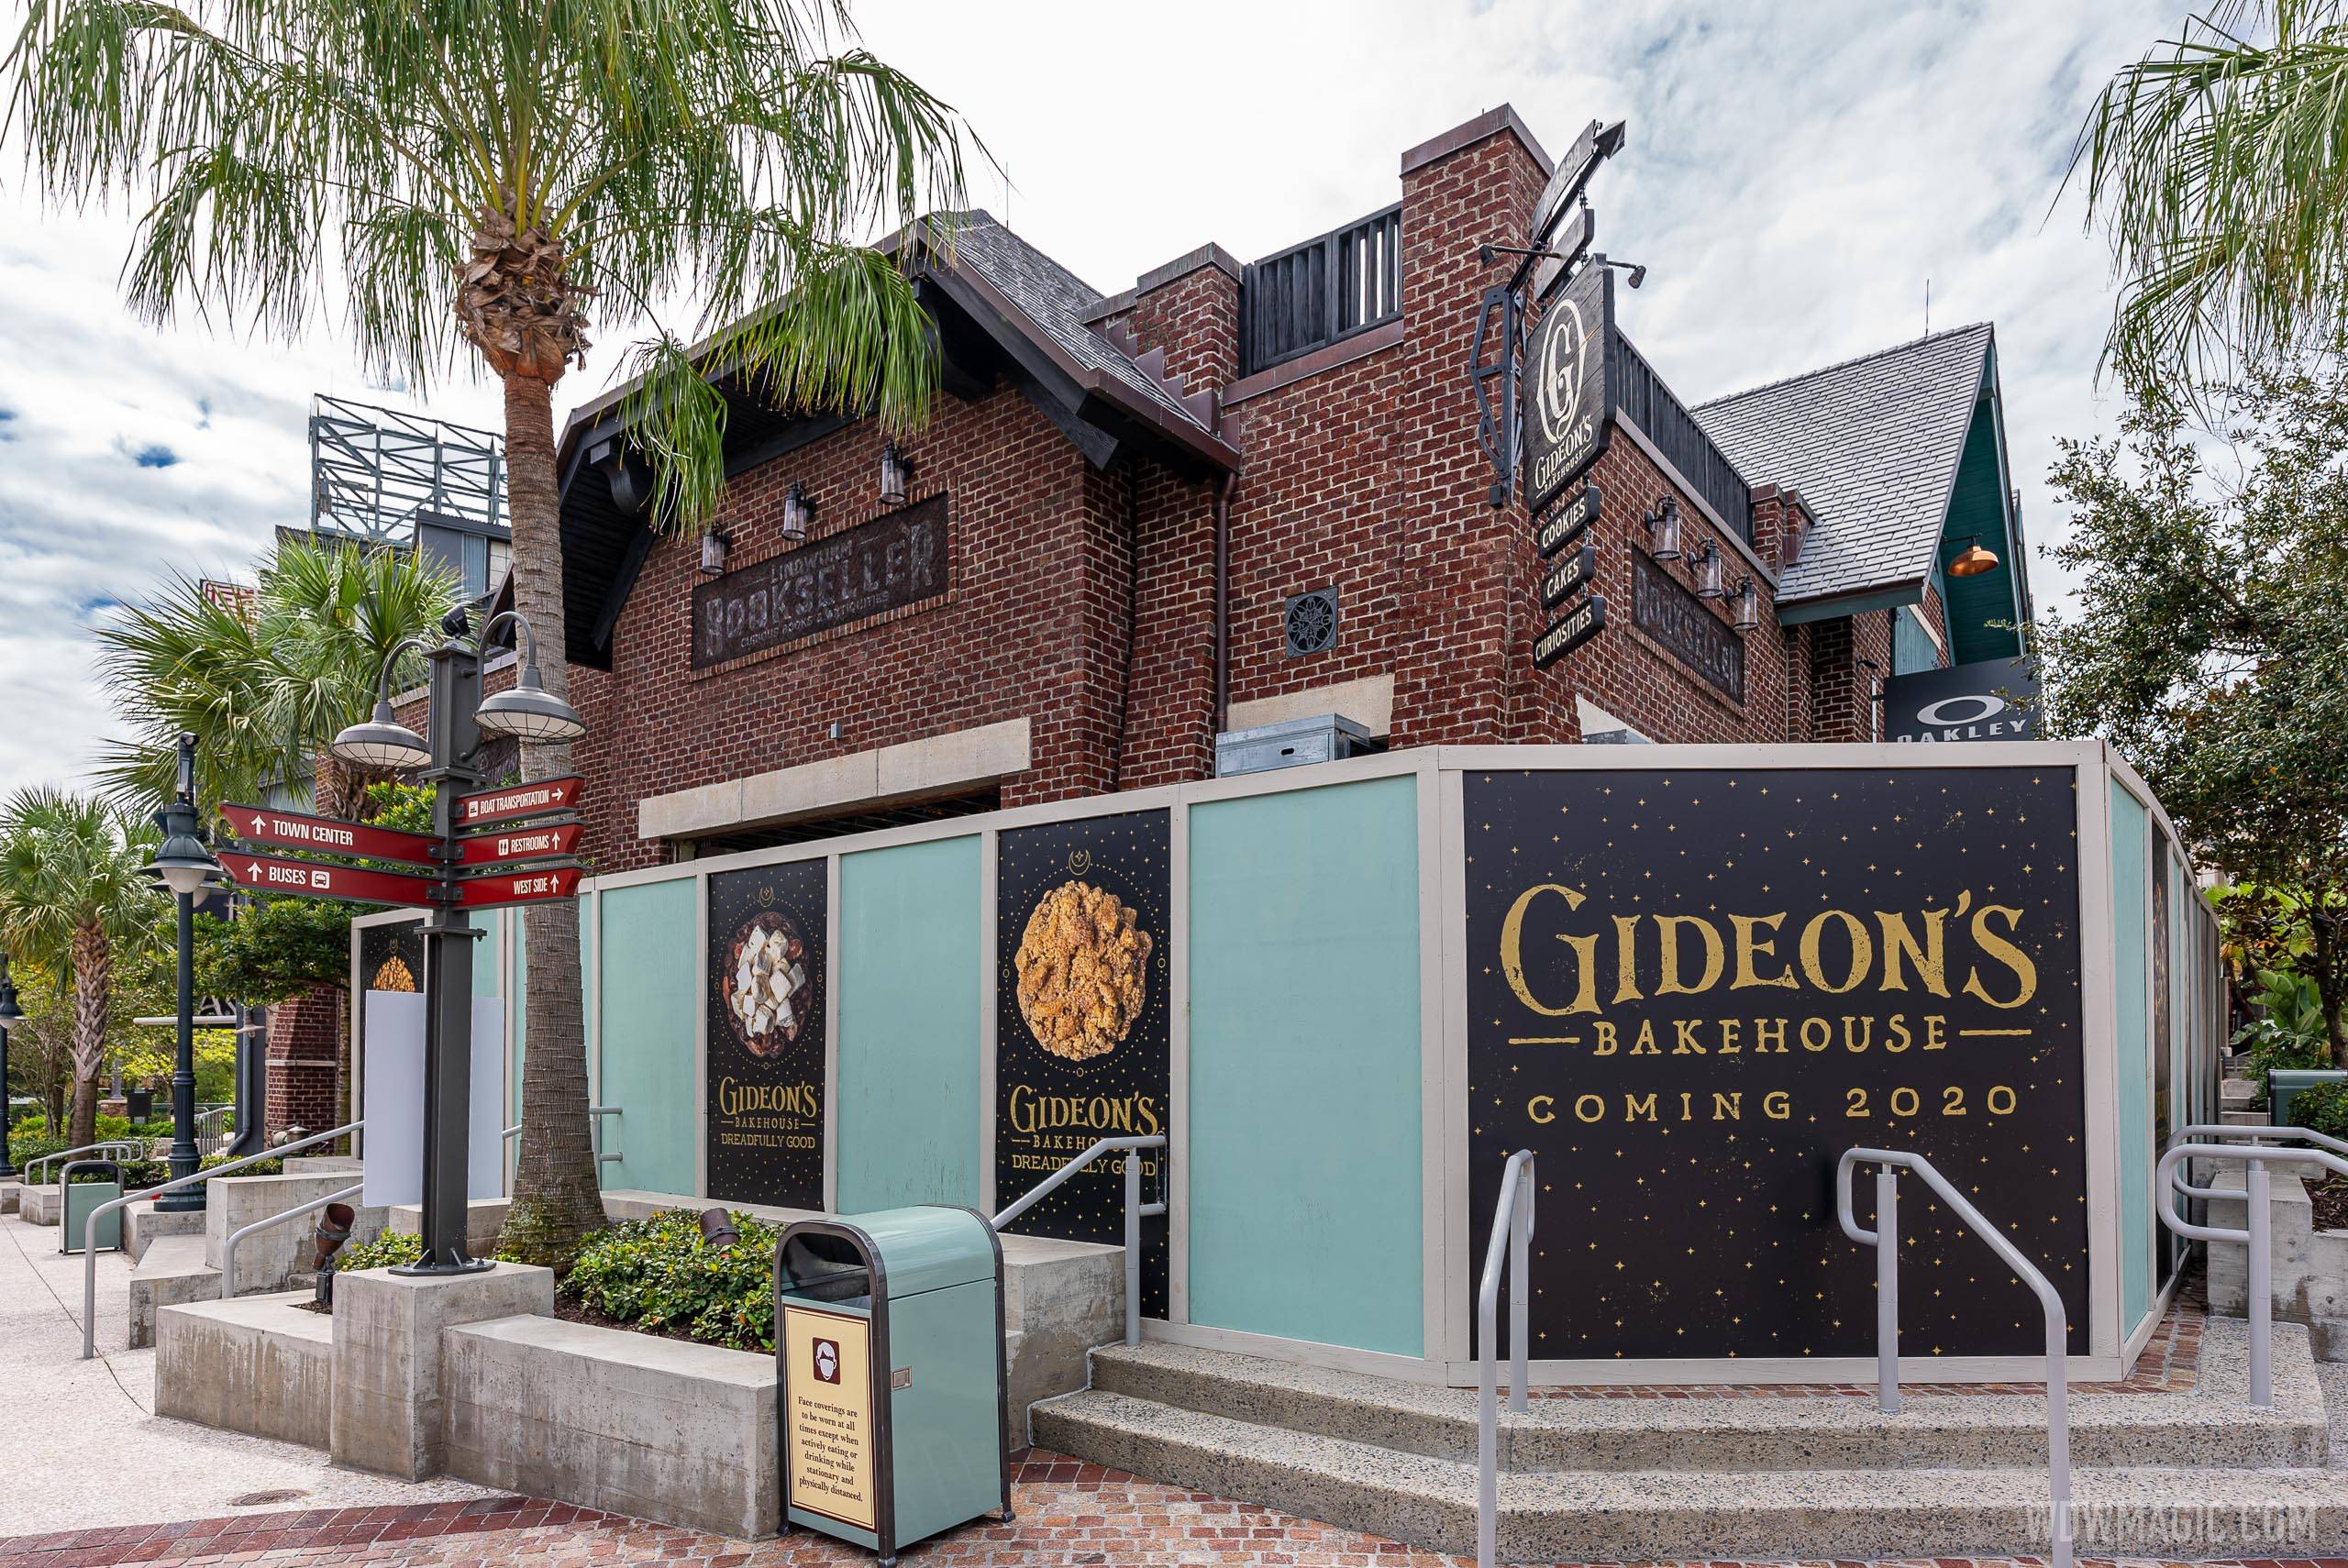 PHOTOS - More exterior details arrive at Gideon's Bakehouse in Disney Springs